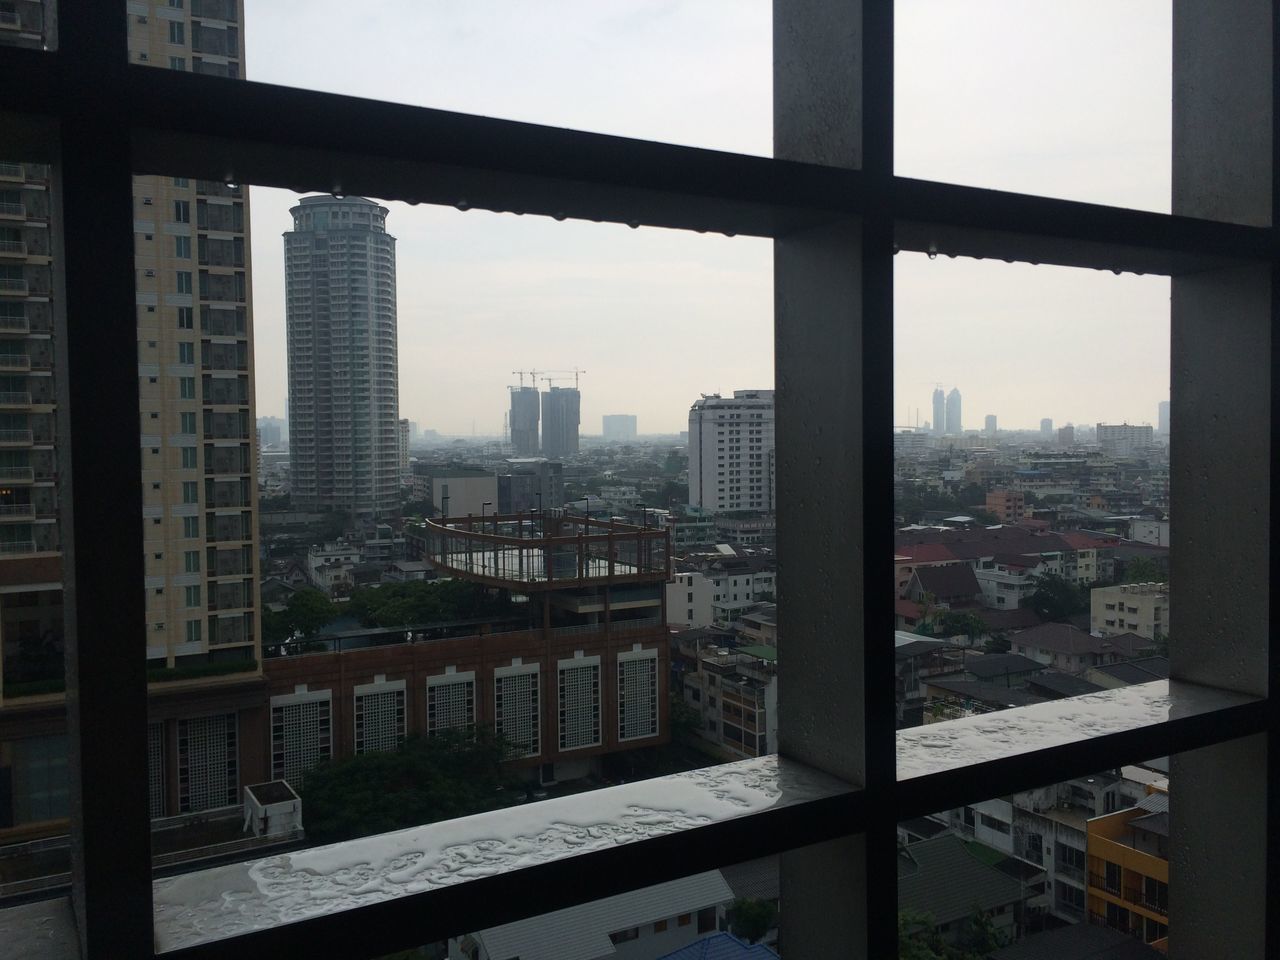 HIGH ANGLE VIEW OF CITY BUILDINGS SEEN THROUGH WINDOW